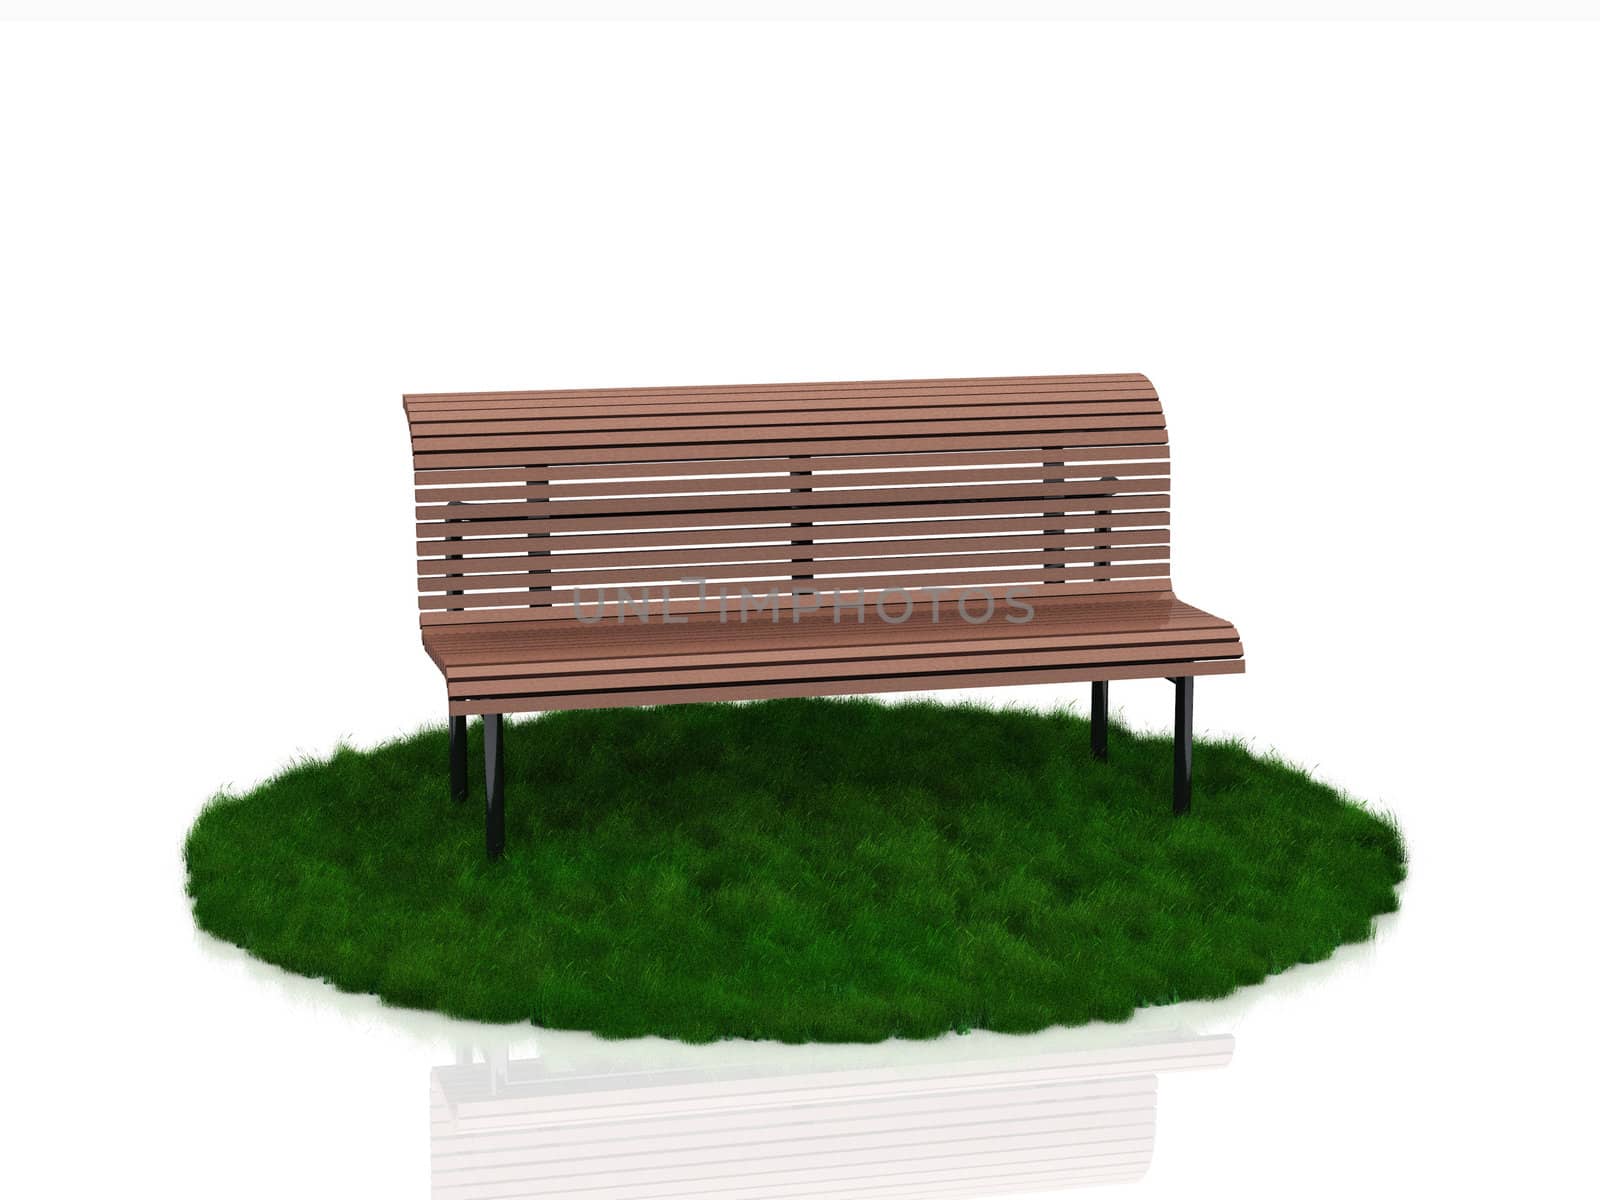 the bench on the grass